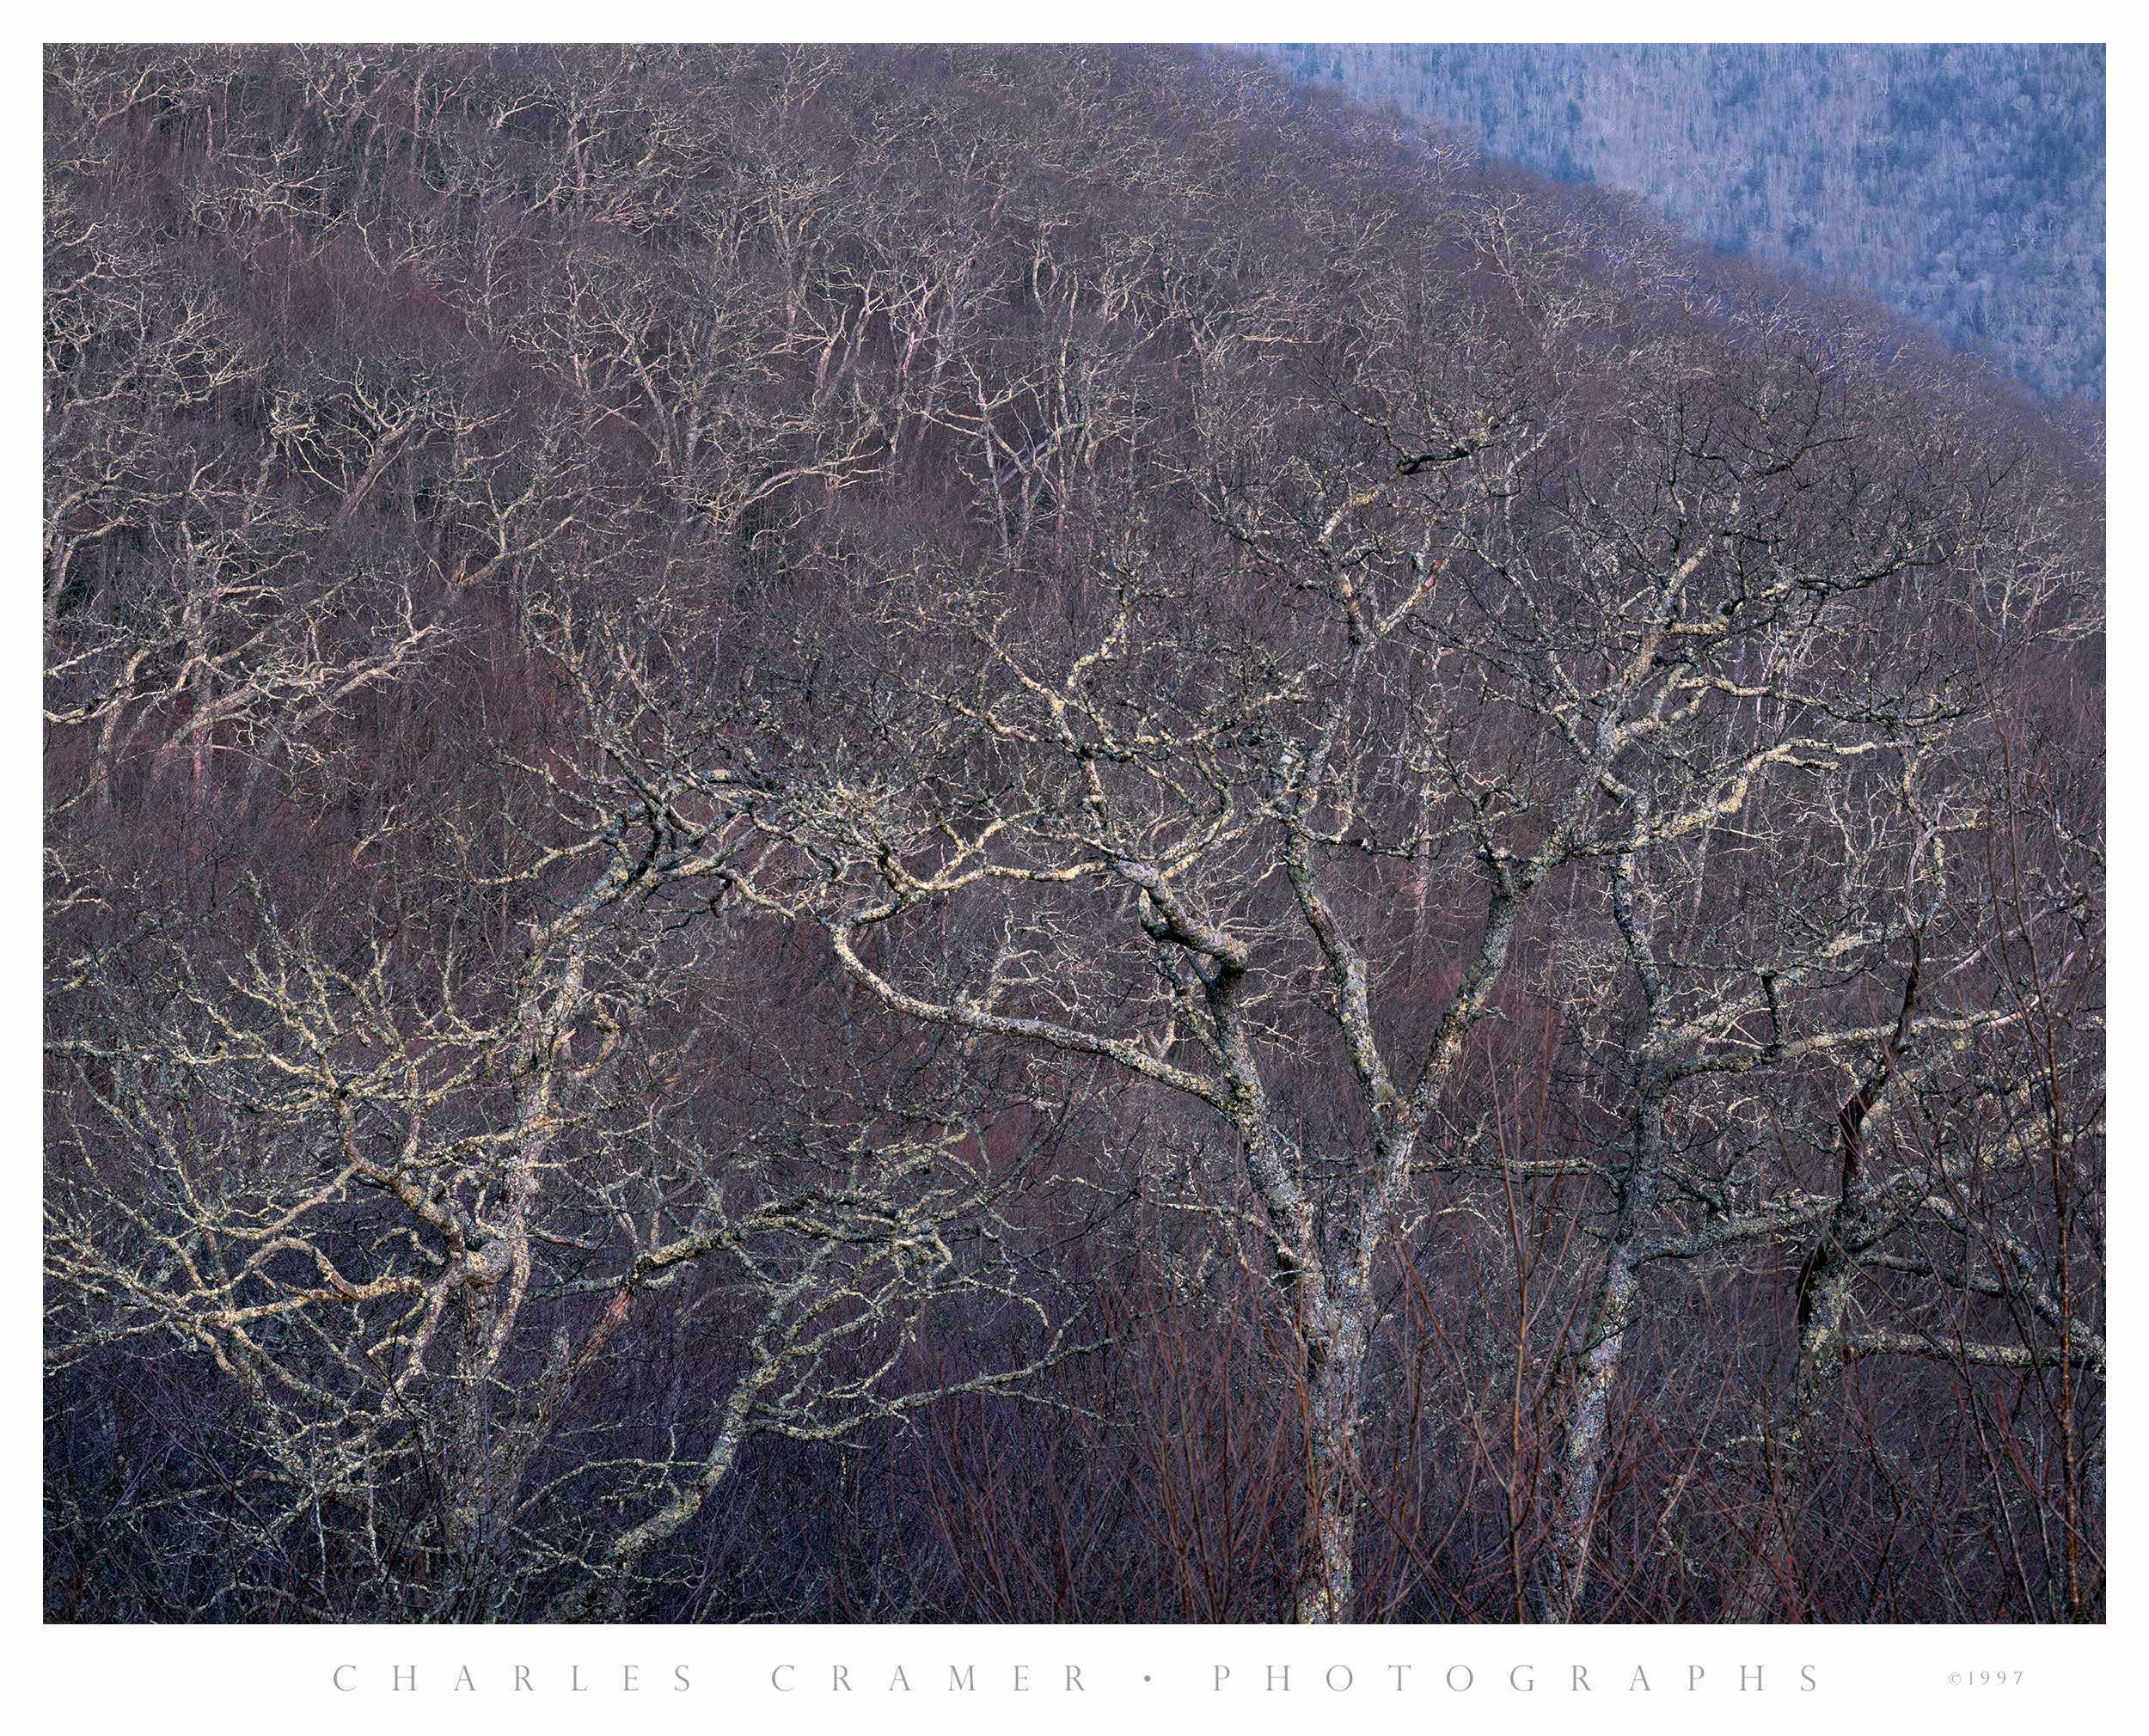 Sea of Trees, Early Spring, Blue Ridge Parkway